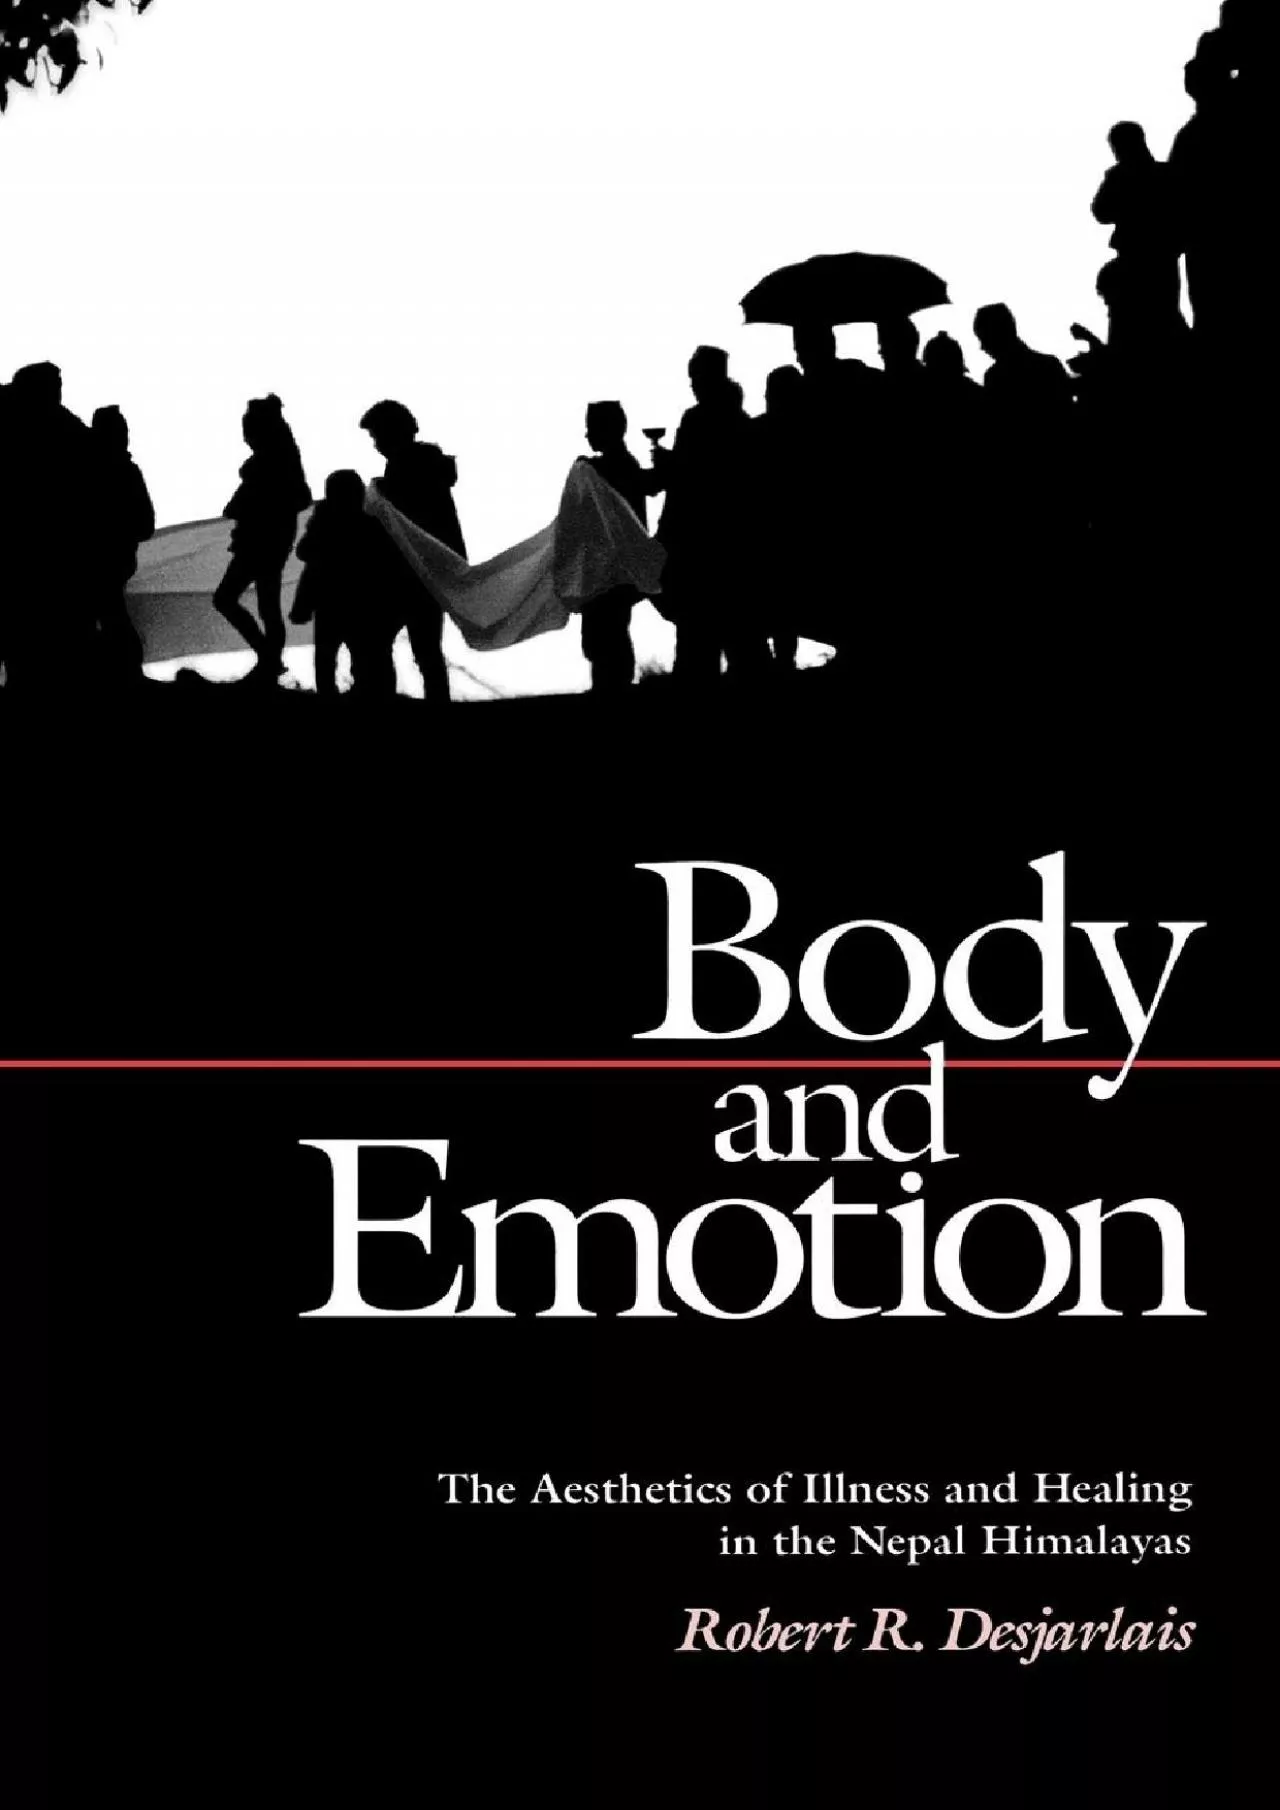 (EBOOK)-Body and Emotion: The Aesthetics of Illness and Healing in the Nepal Himalayas